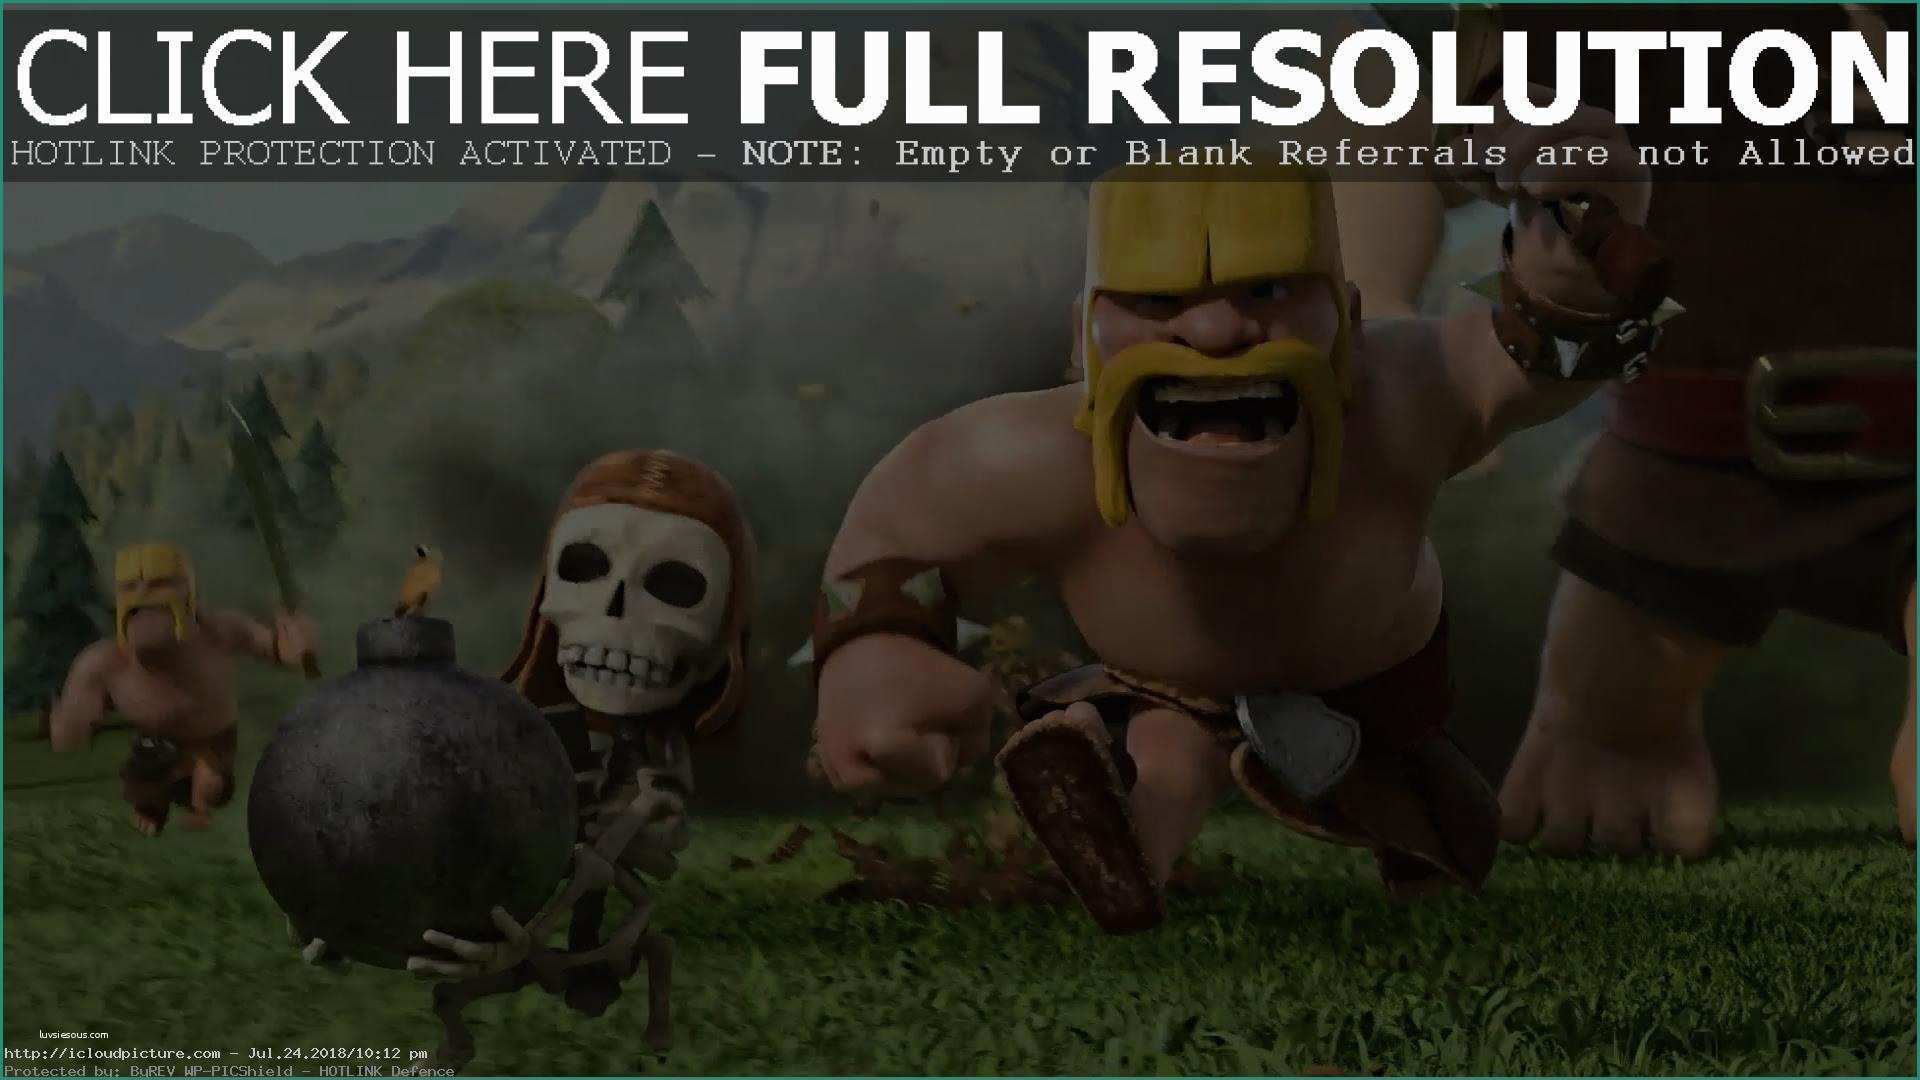 Sfondi Clash Of Clans Hd E Clash Clans Wallpaper Download Group 61 Download for Free